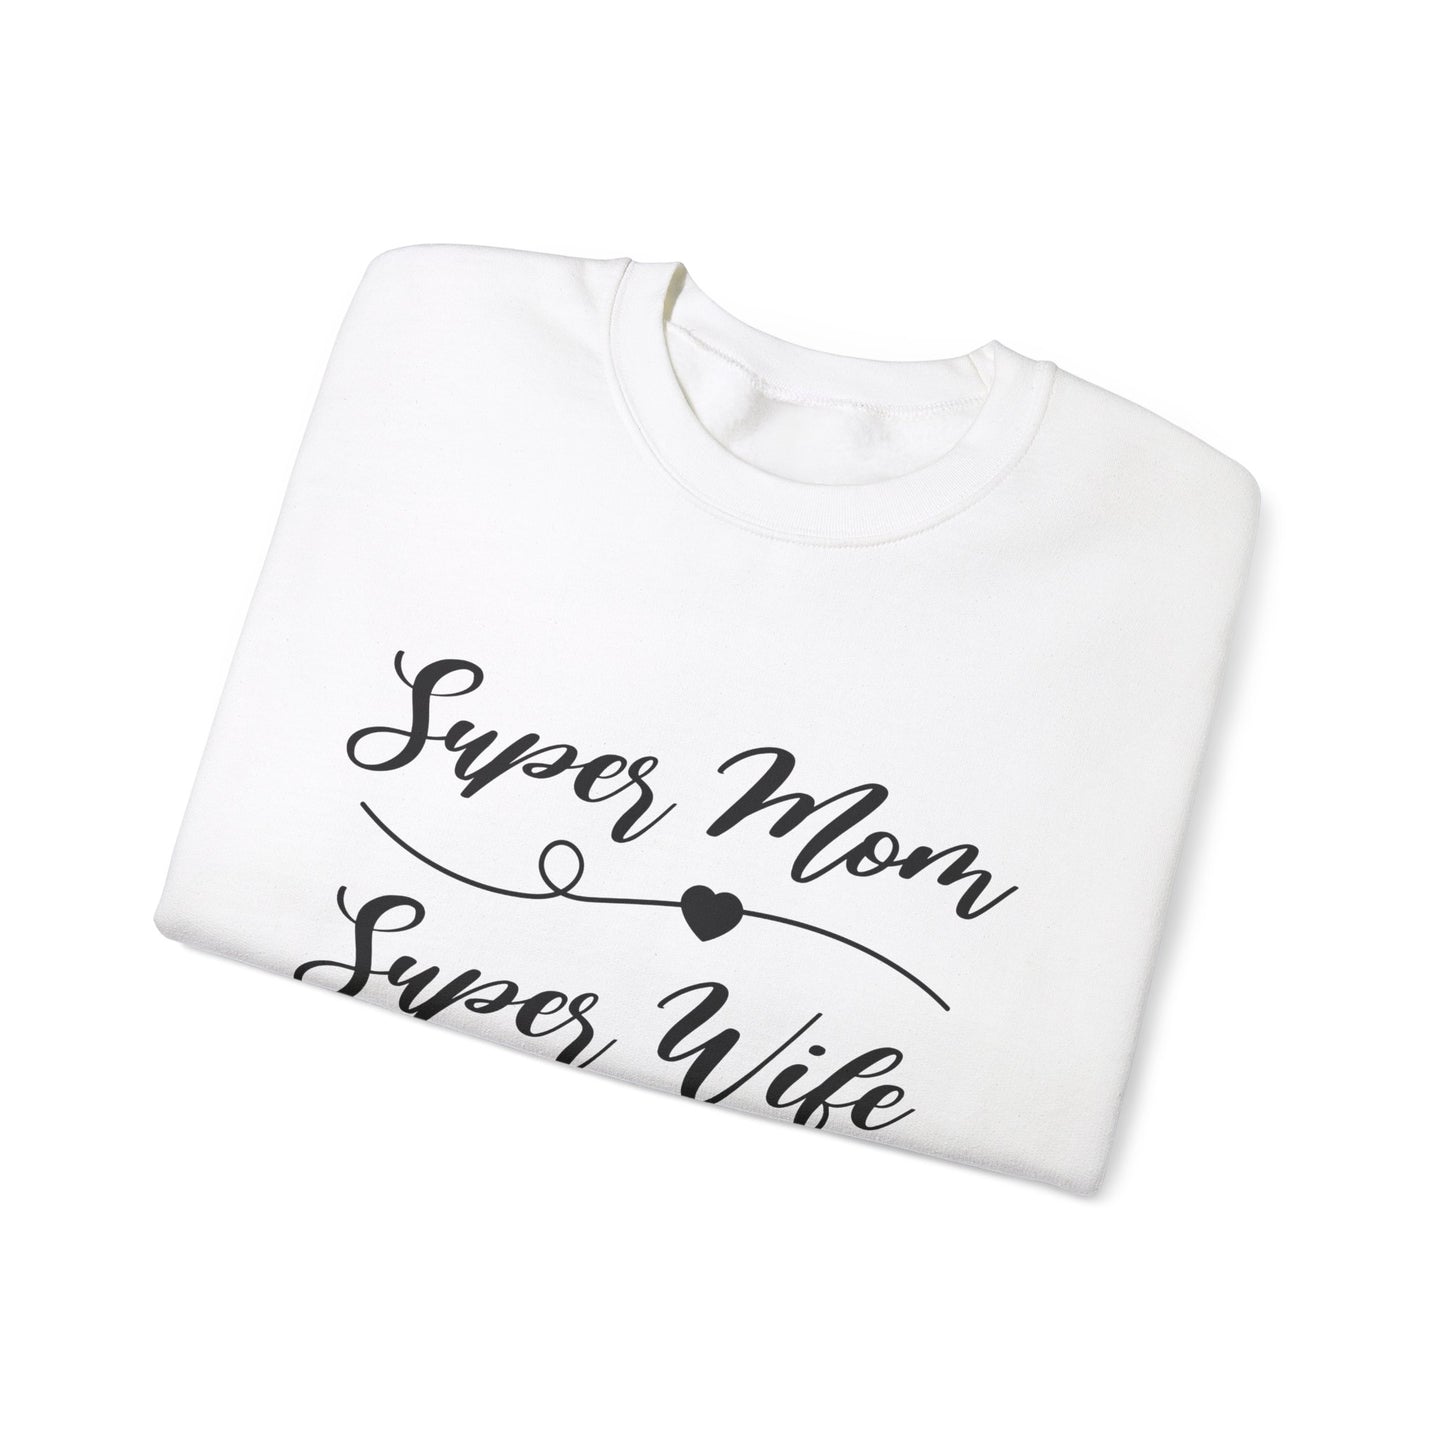 Personalized premium sweatshirt for mom, comfort and style, mother's day, gifts for mom's day, custom mama, super mom